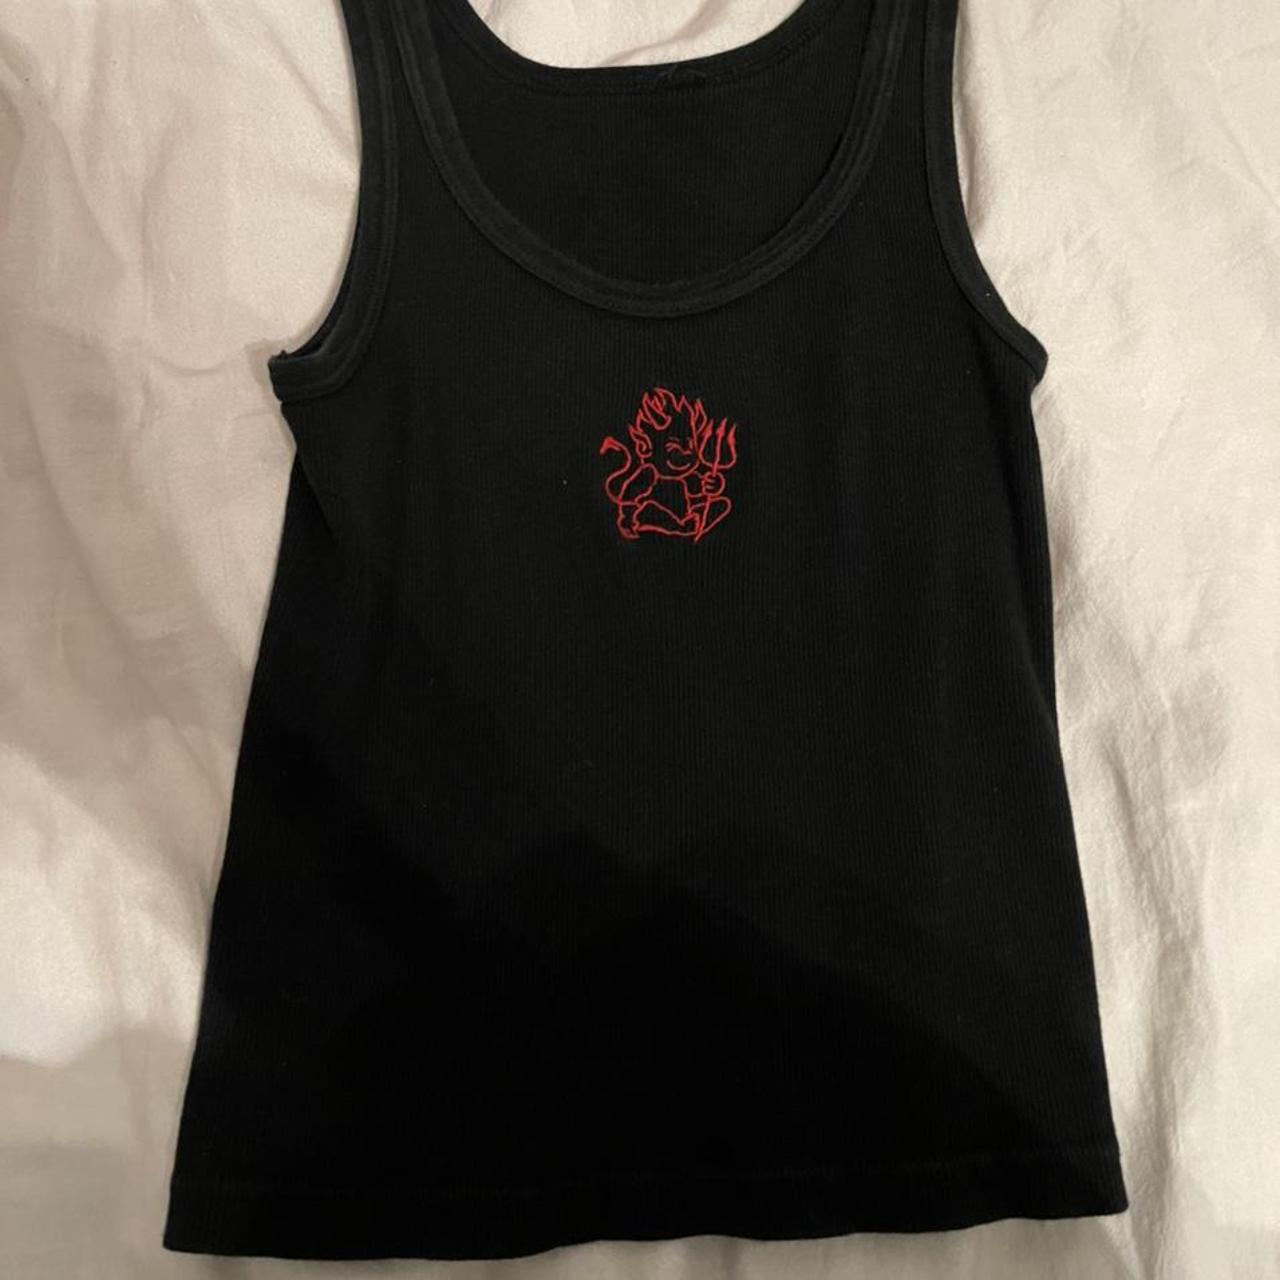 Brandy Melville Women's Black and Red Vest